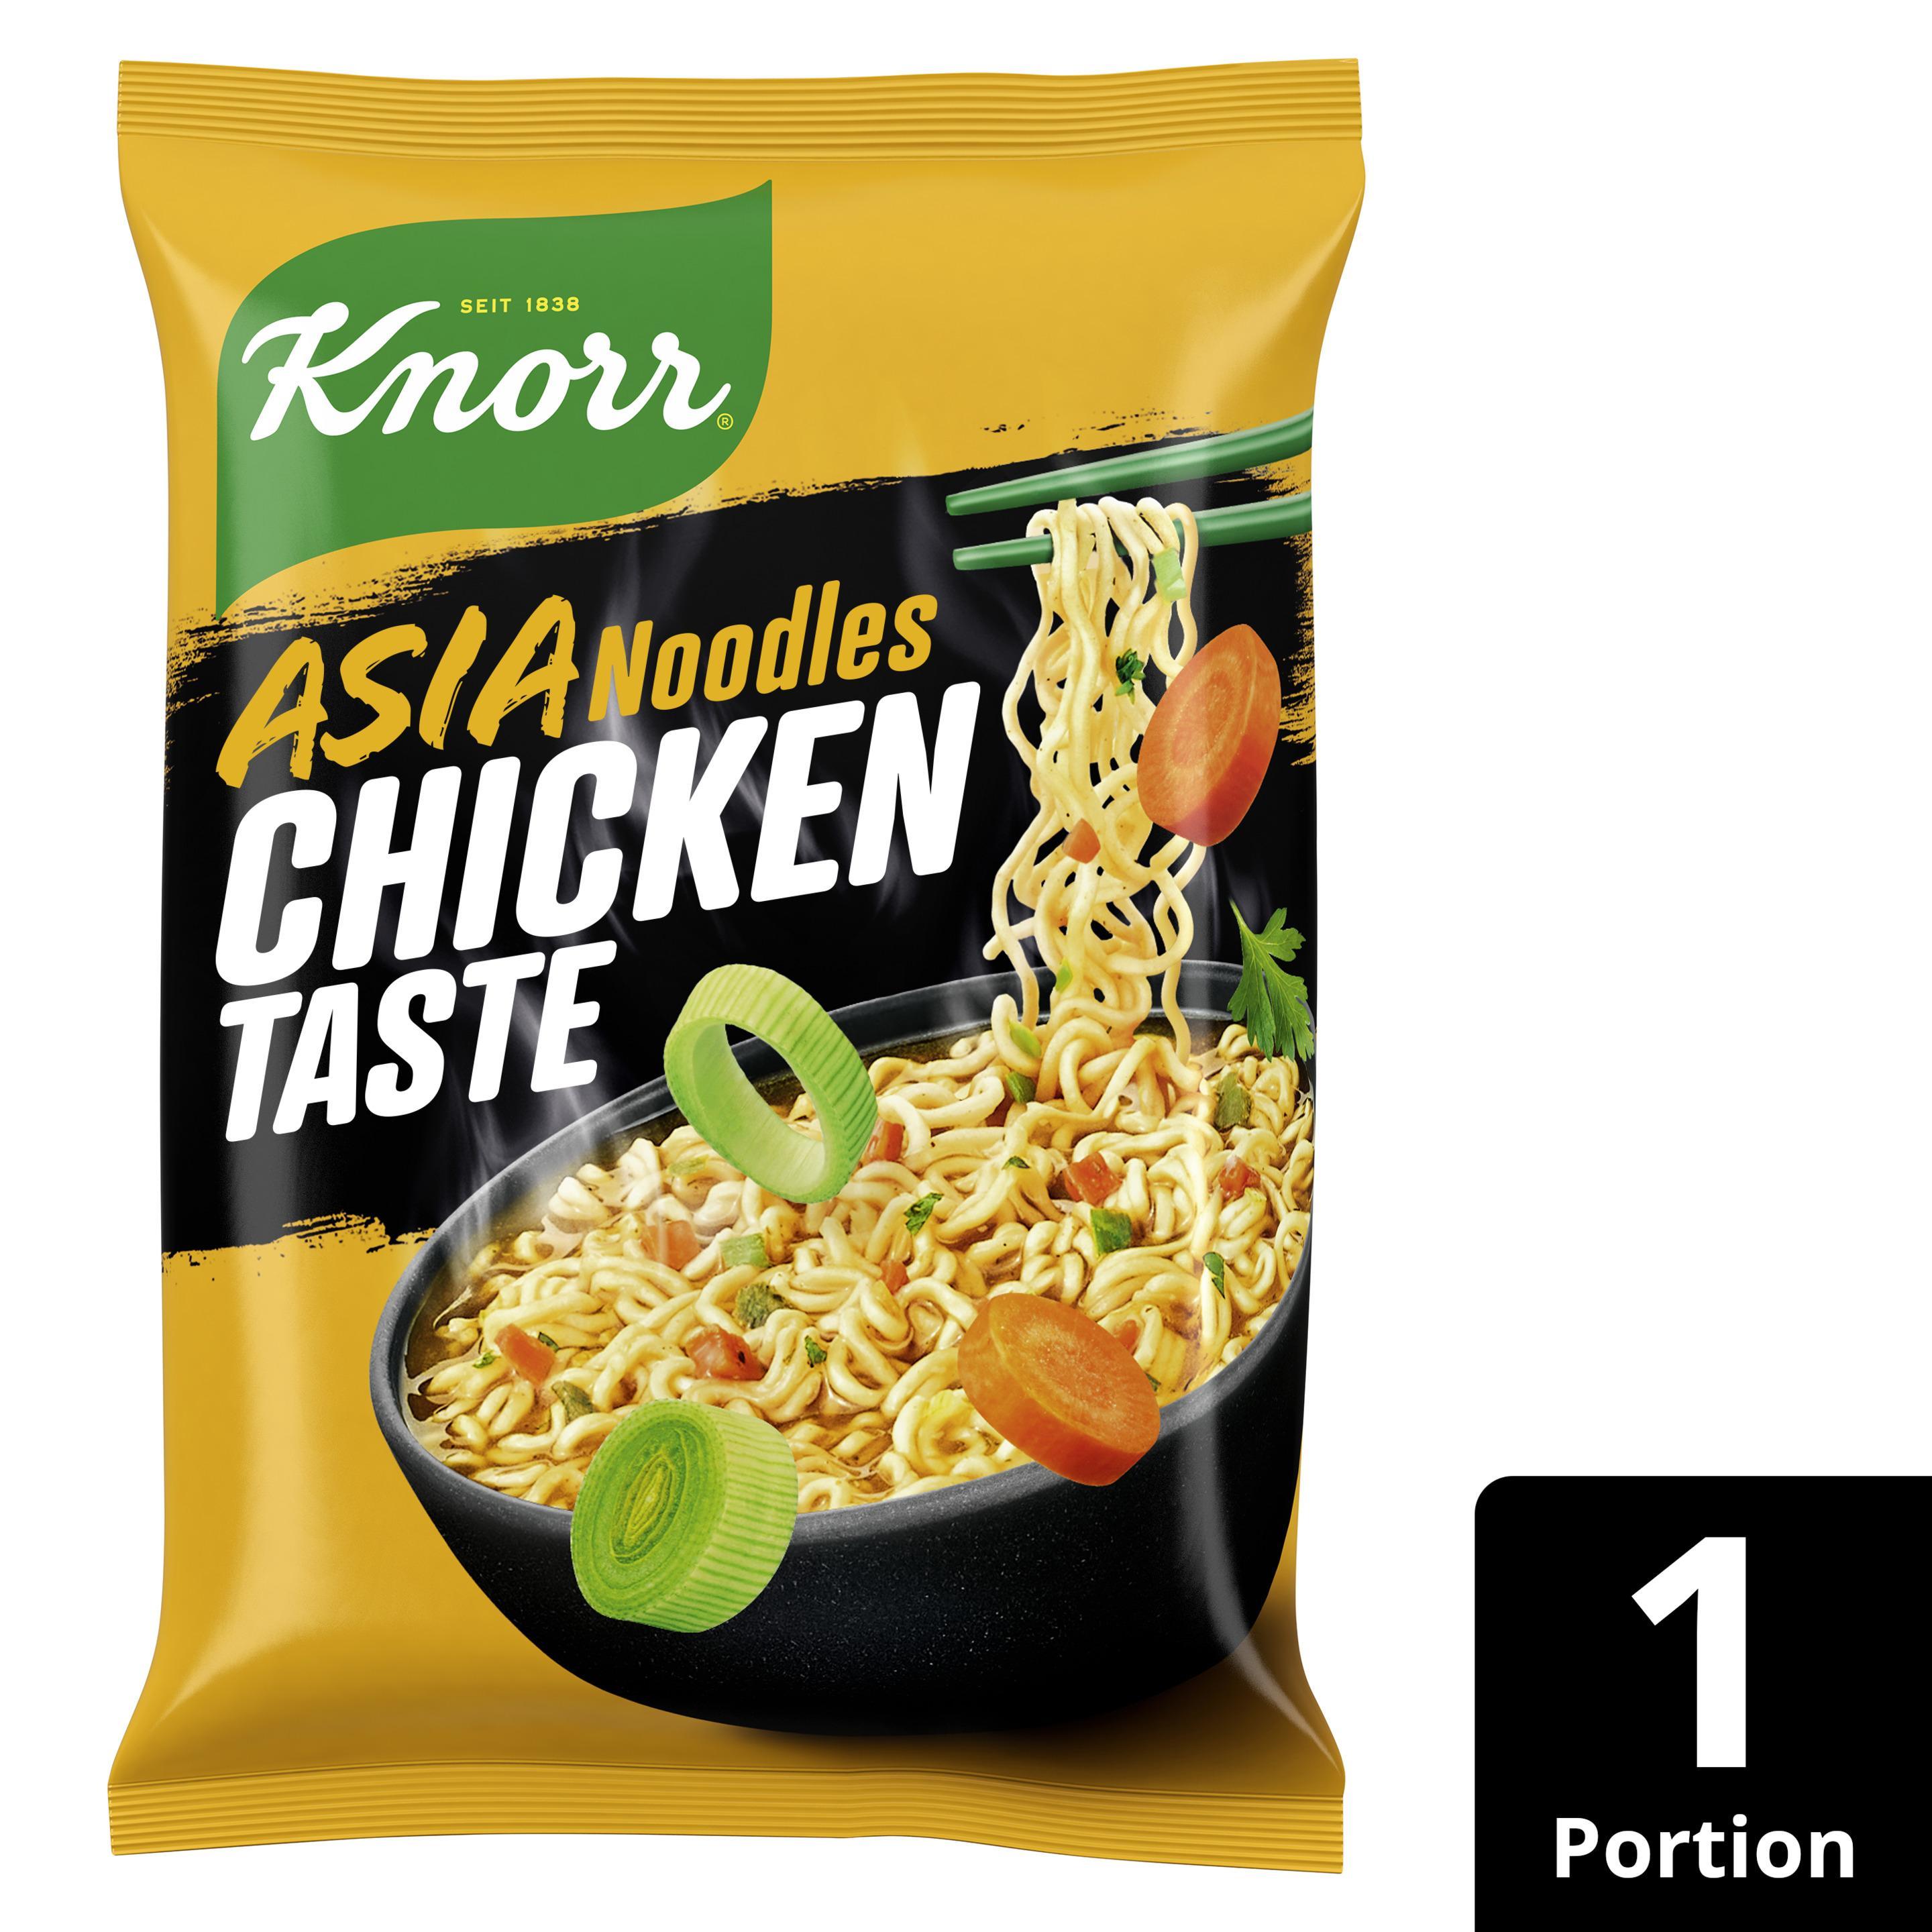 Knorr Asia Noodles Chicken 70 g